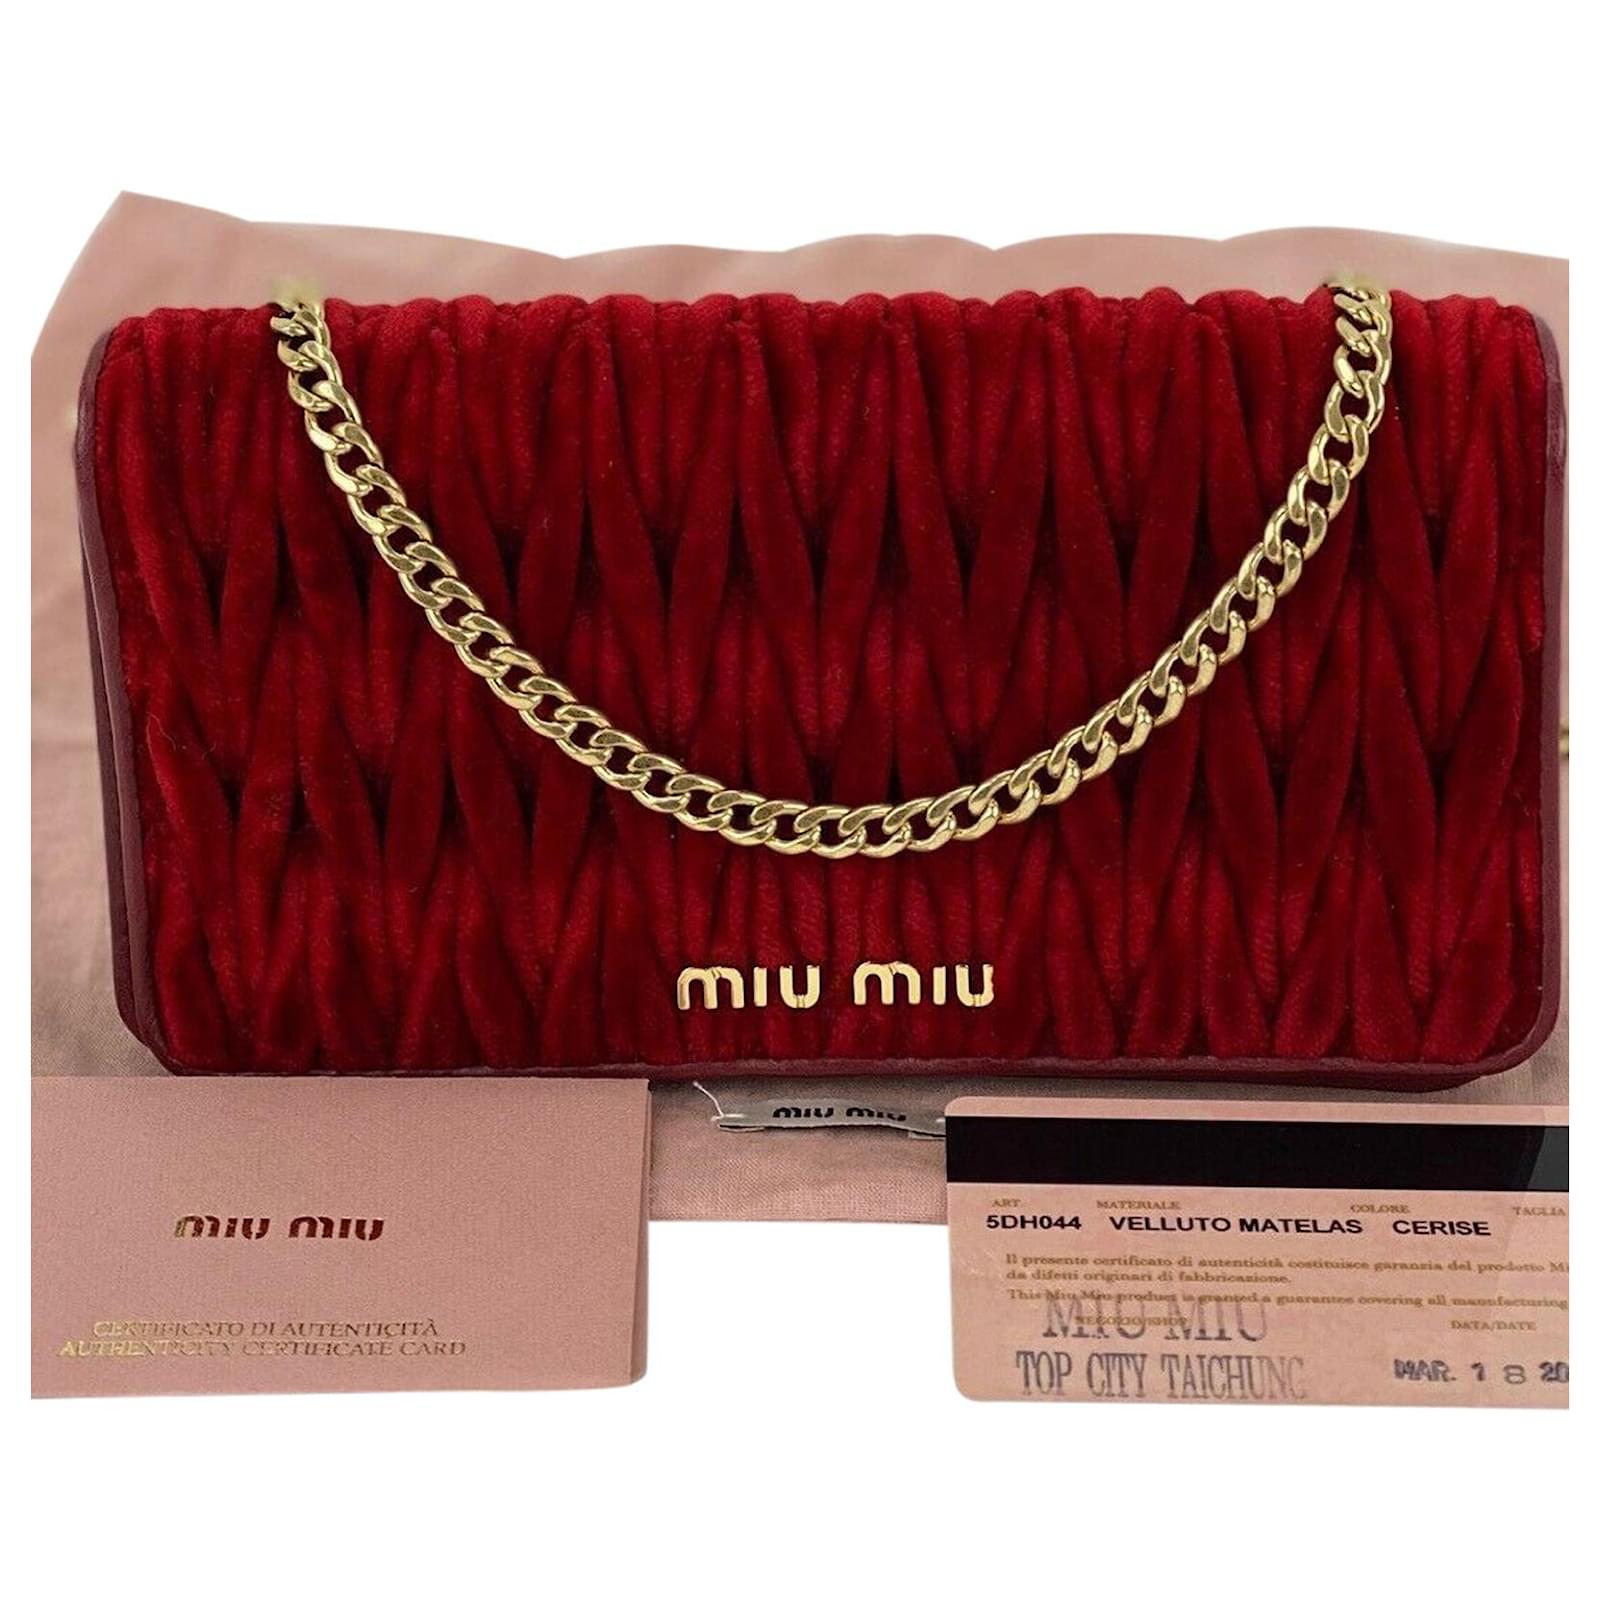 Miu Miu Bag Cerise Red Leather Velvet Wallet On A Chain Woc Clutch